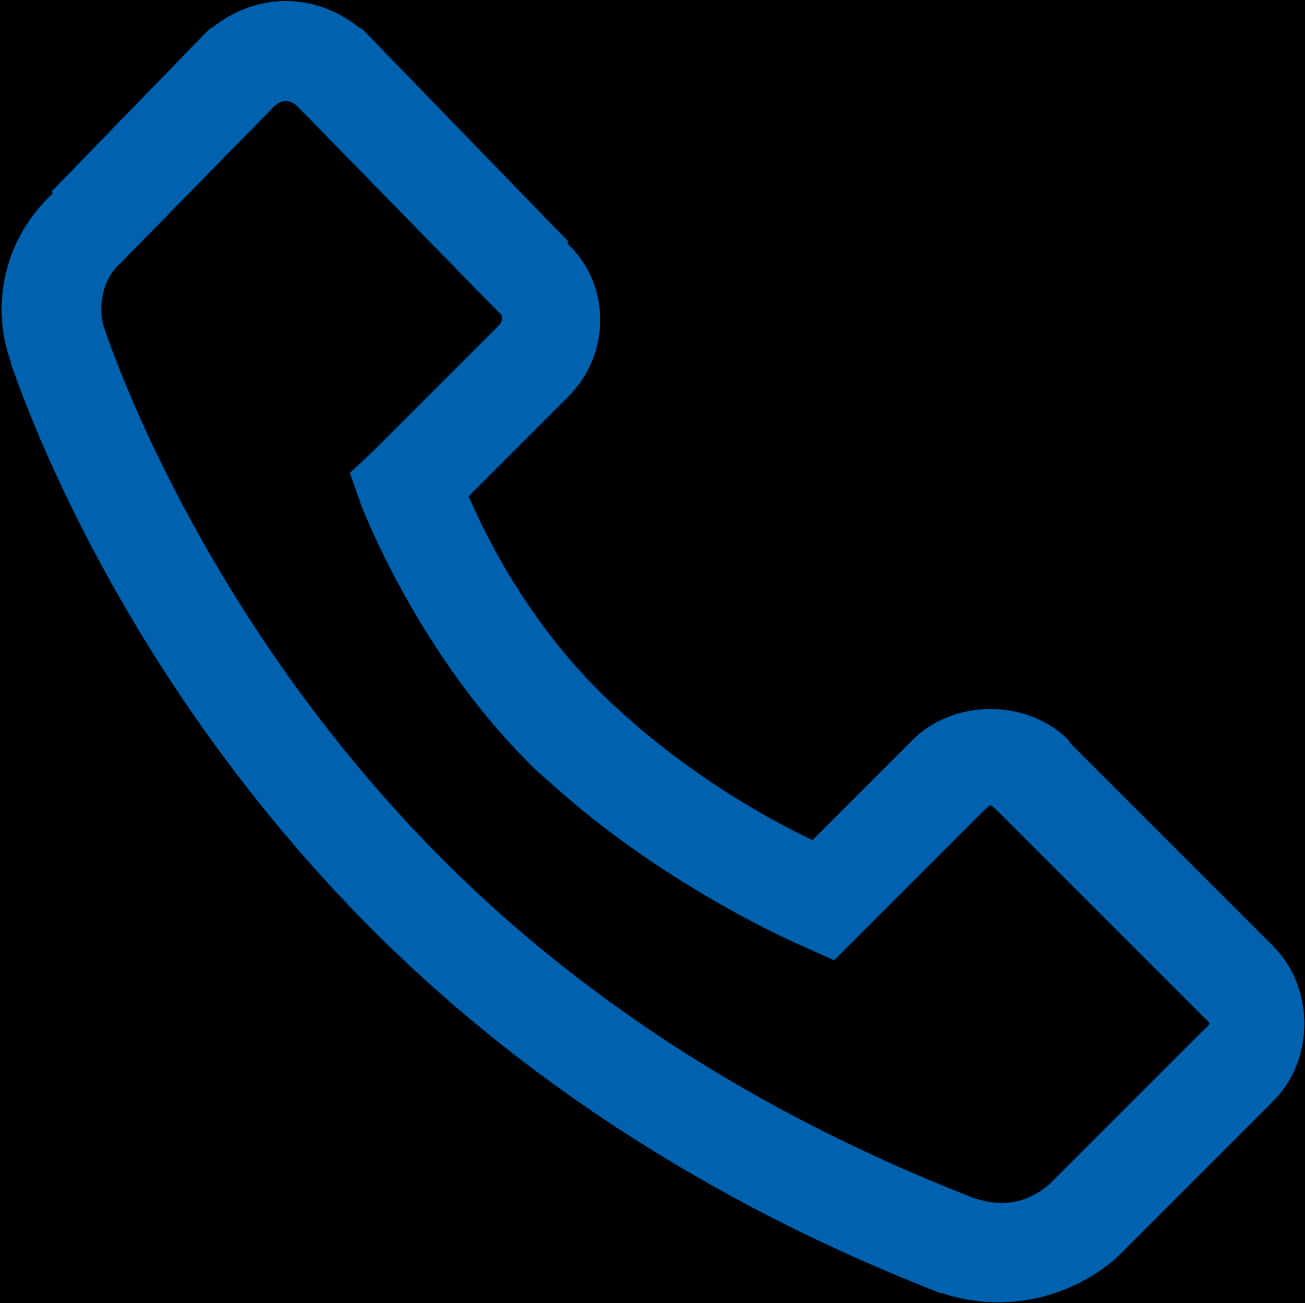 A Blue Telephone Receiver On A Black Background